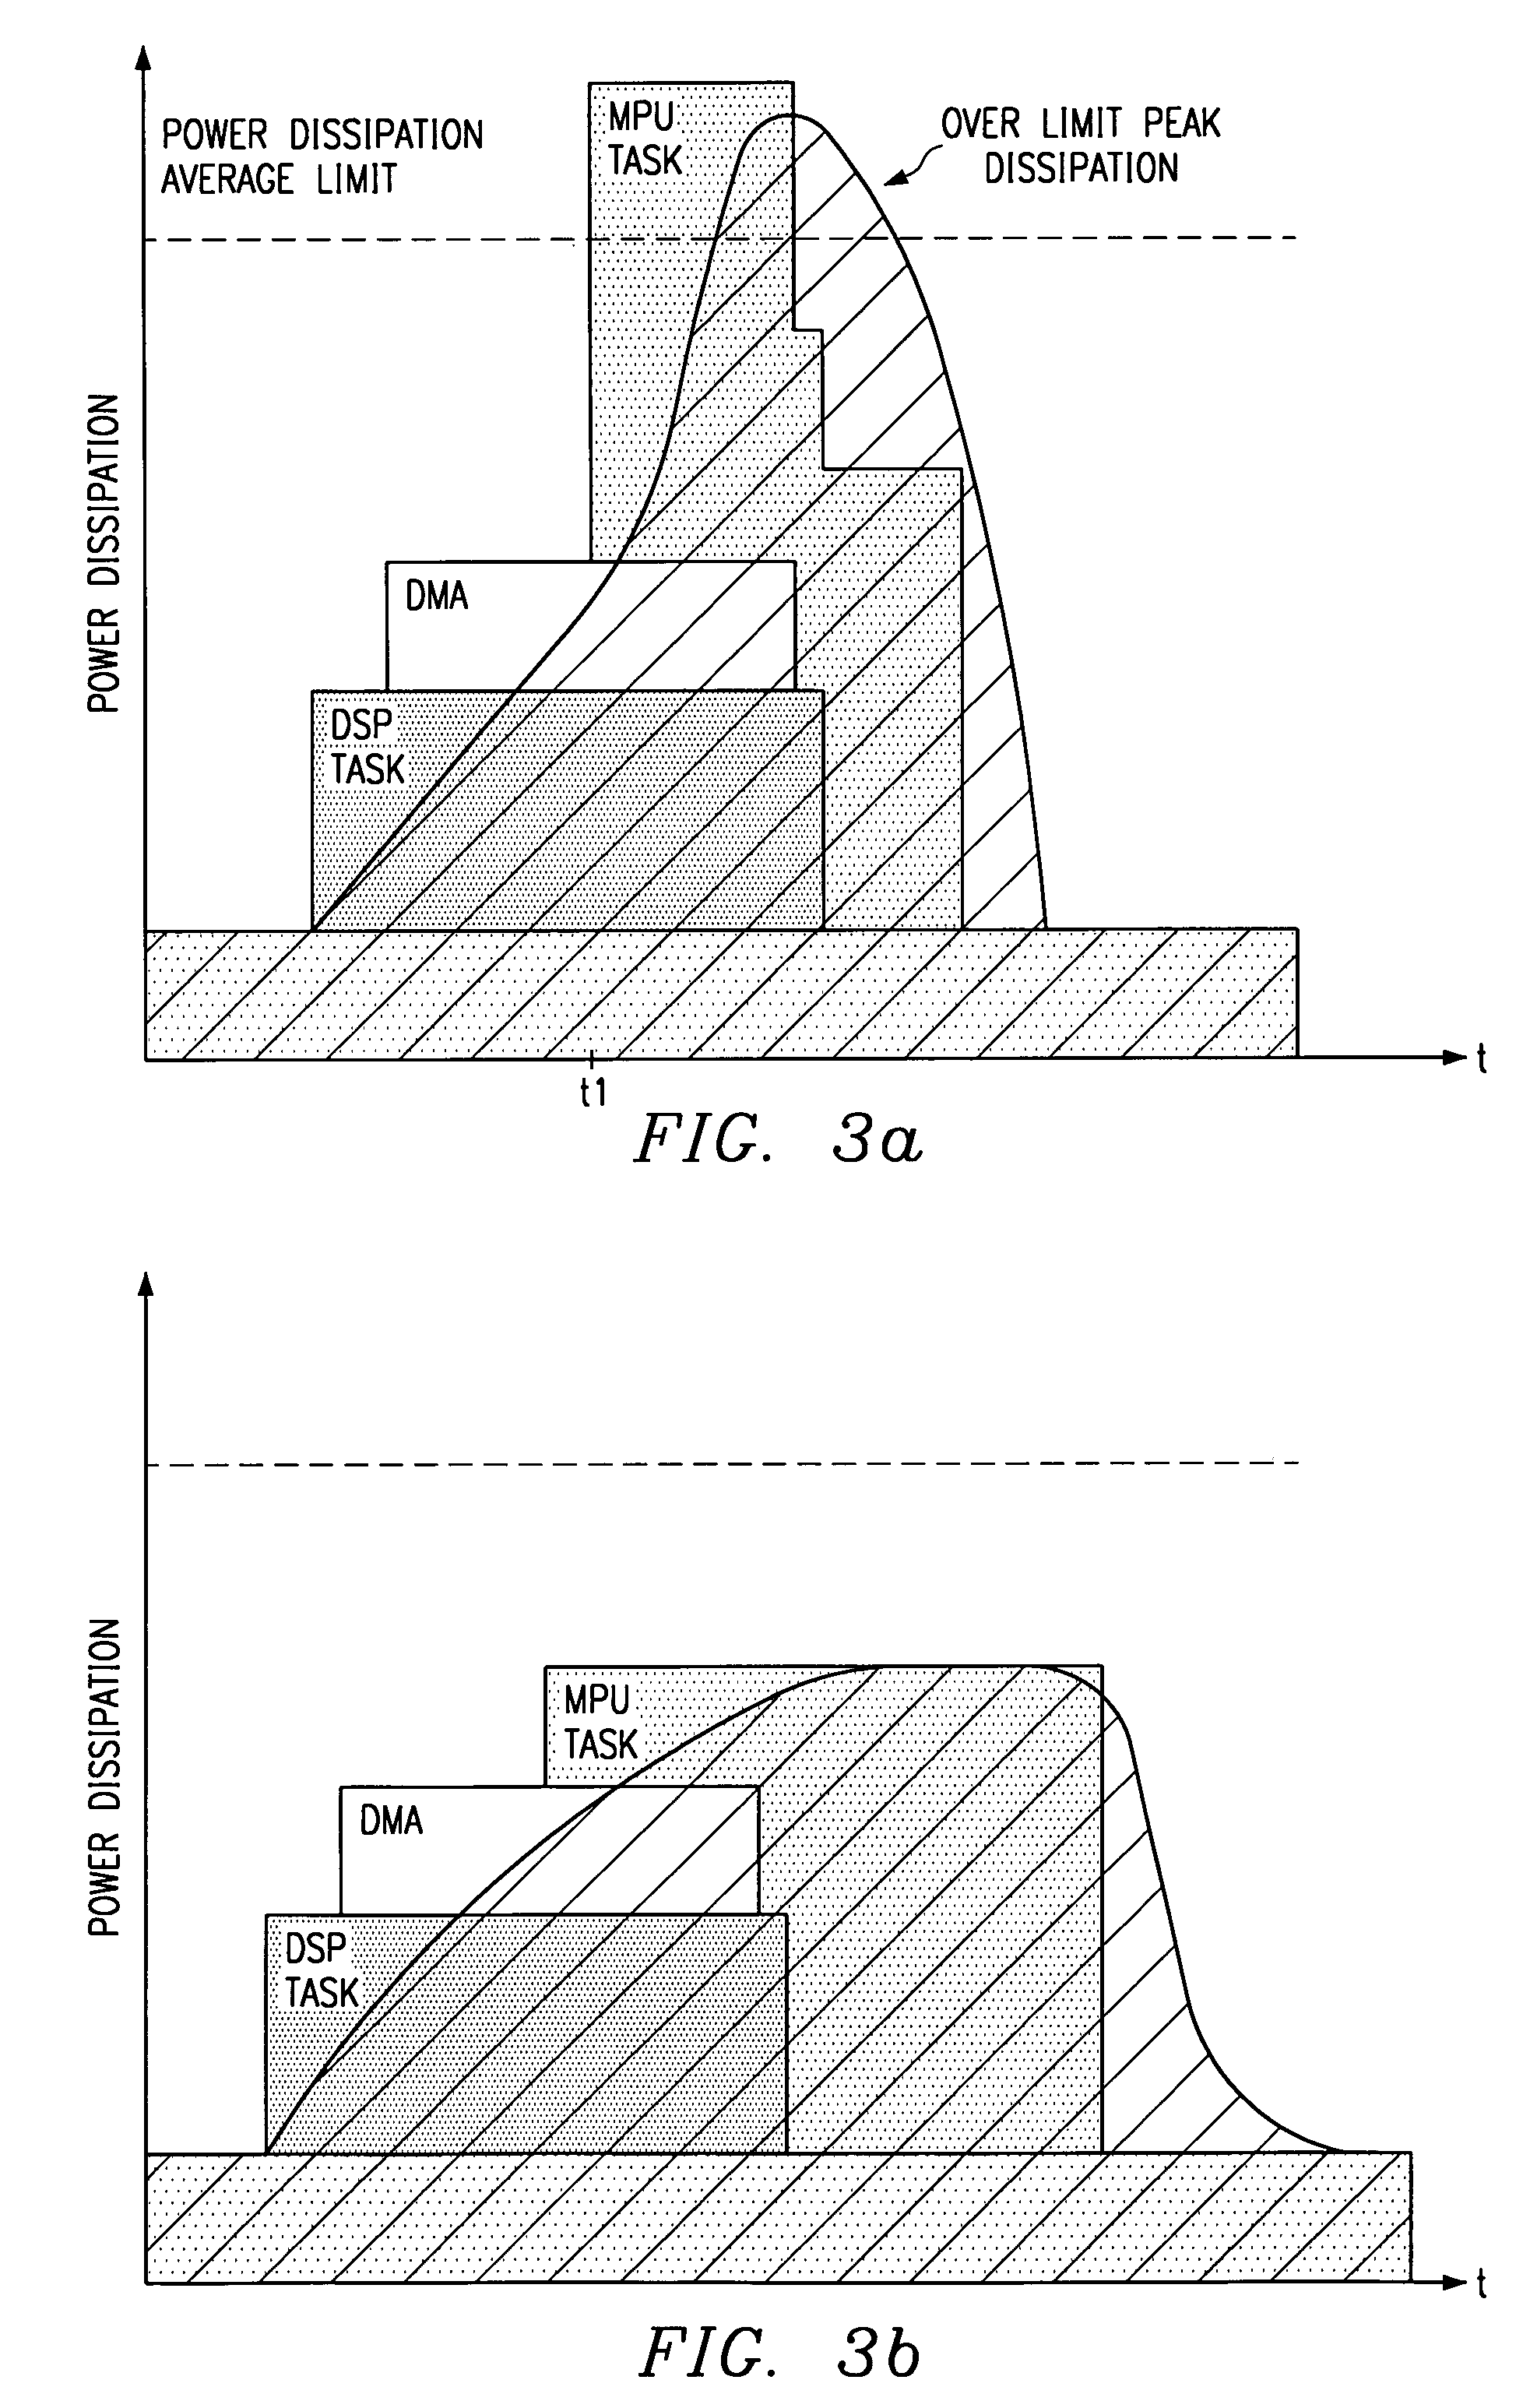 System and method for executing tasks according to a selected scenario in response to probabilistic power consumption information of each scenario